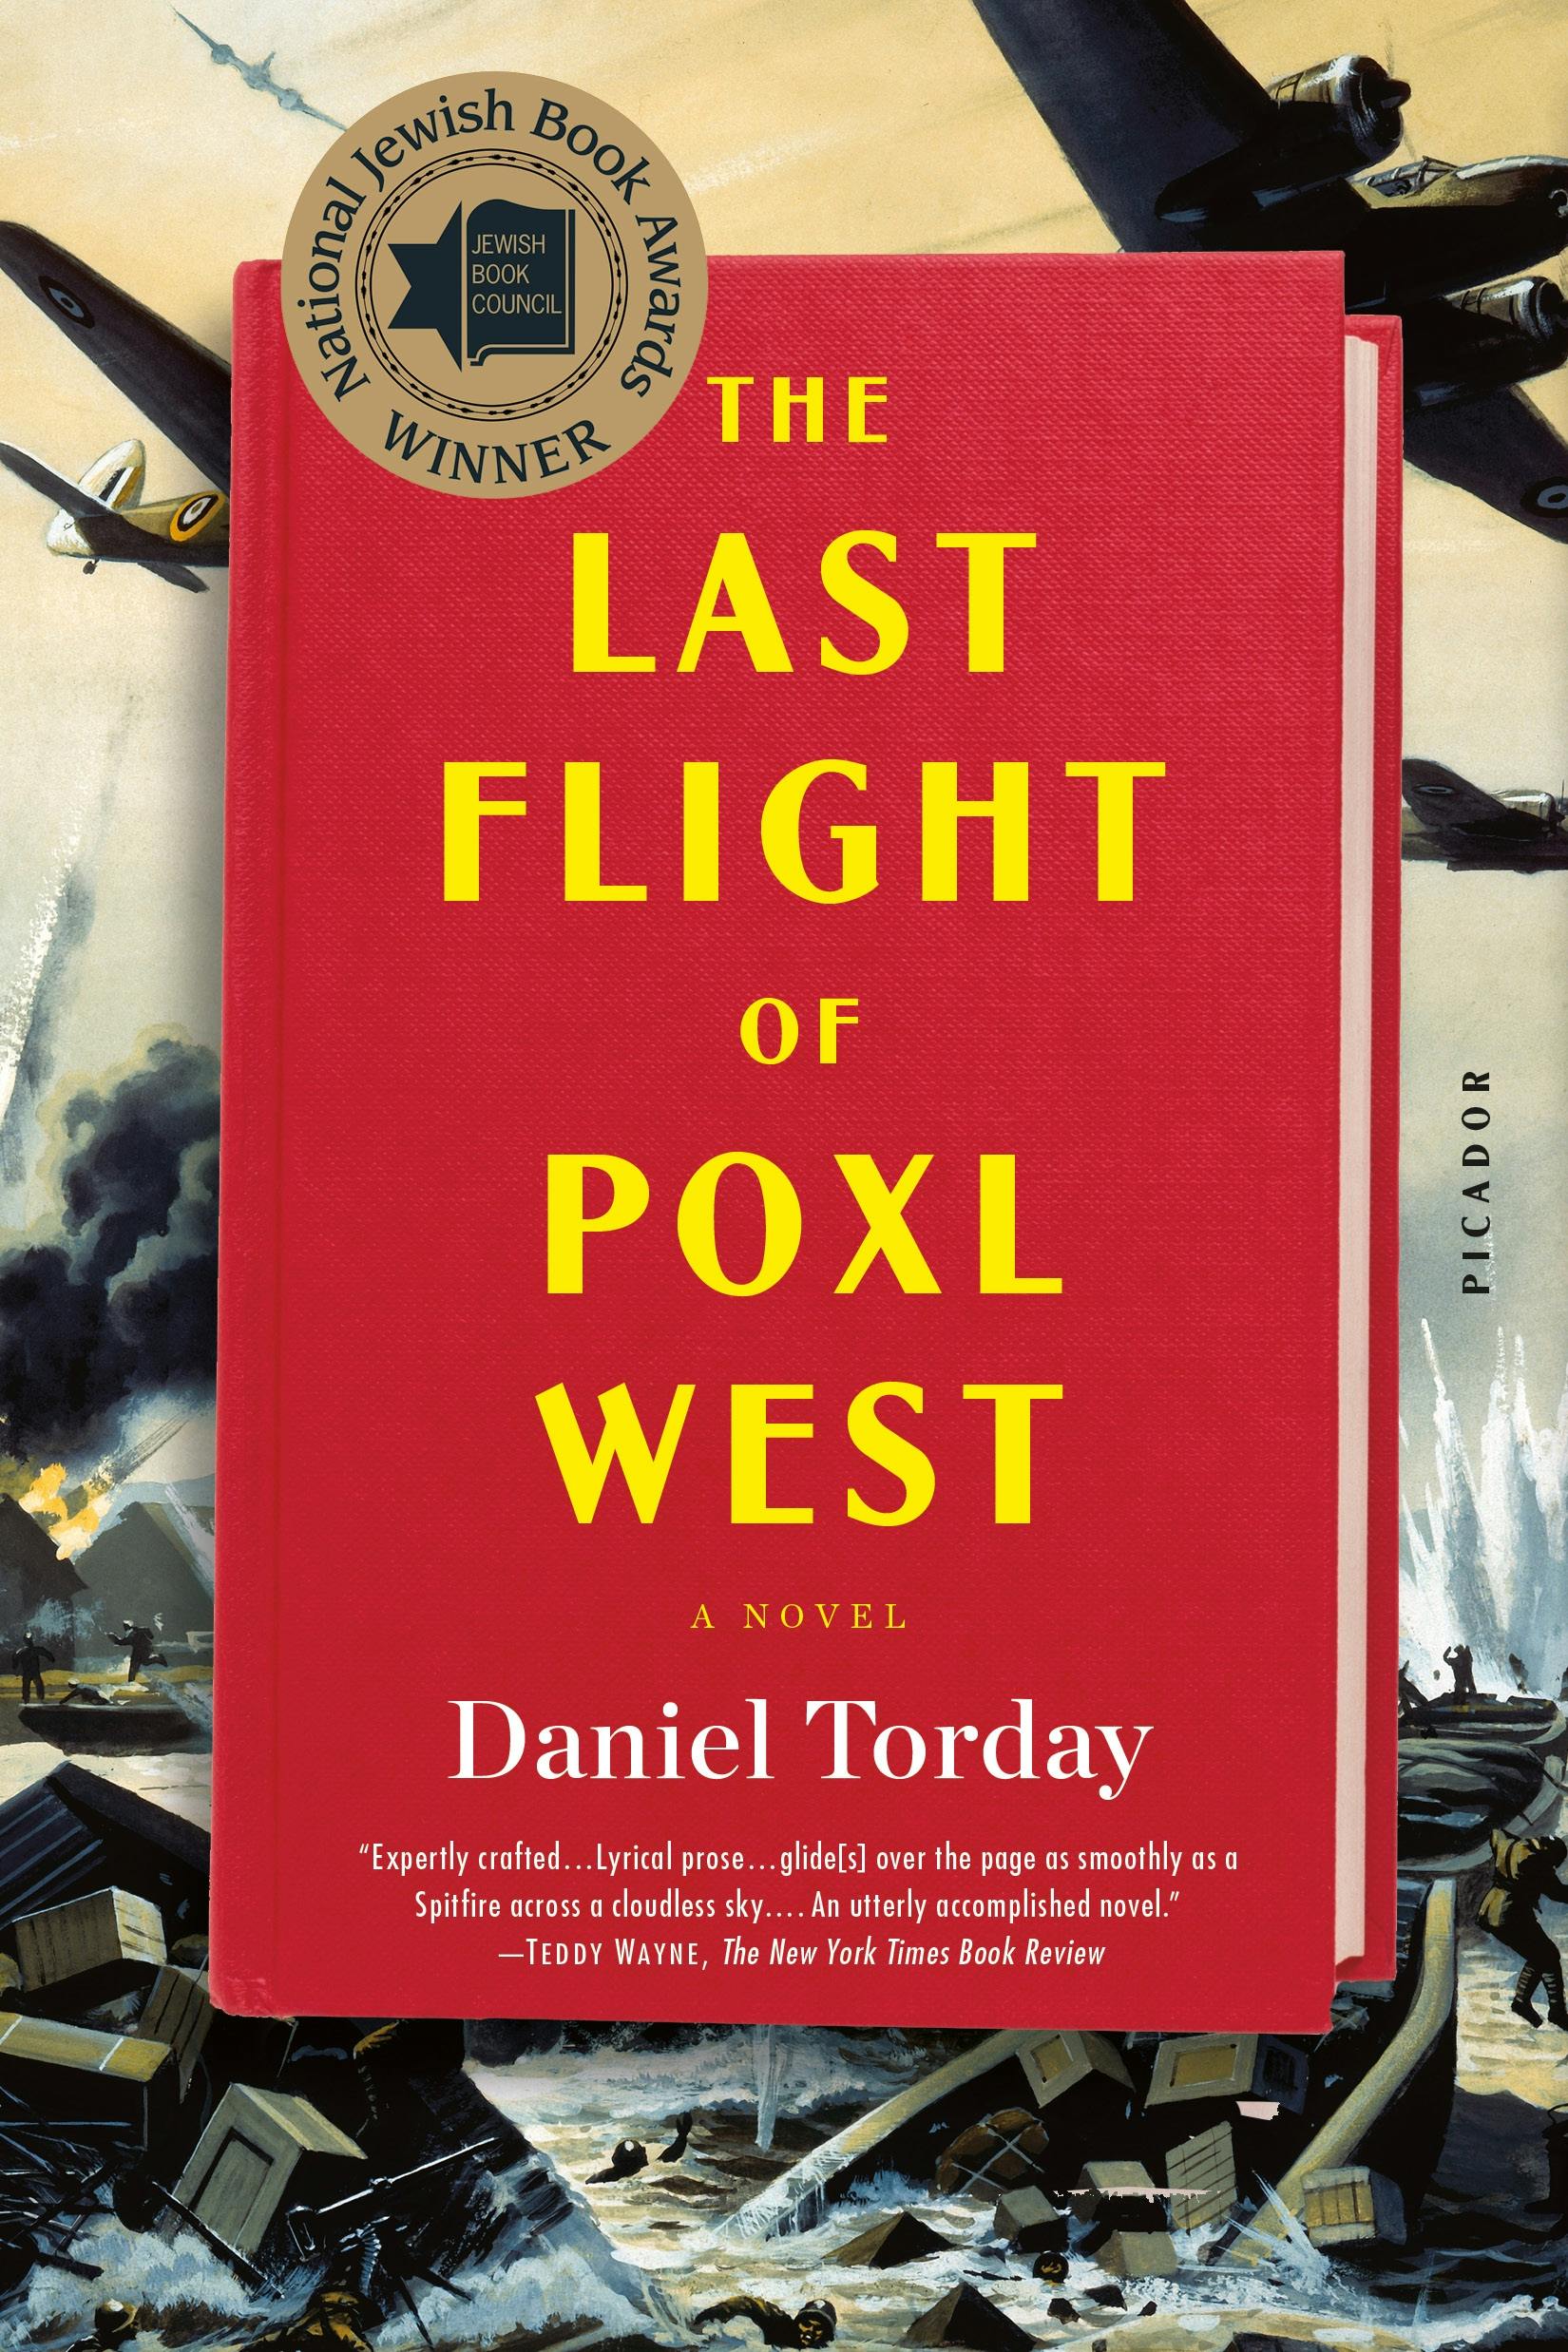 The Last Flight of Poxl West photo